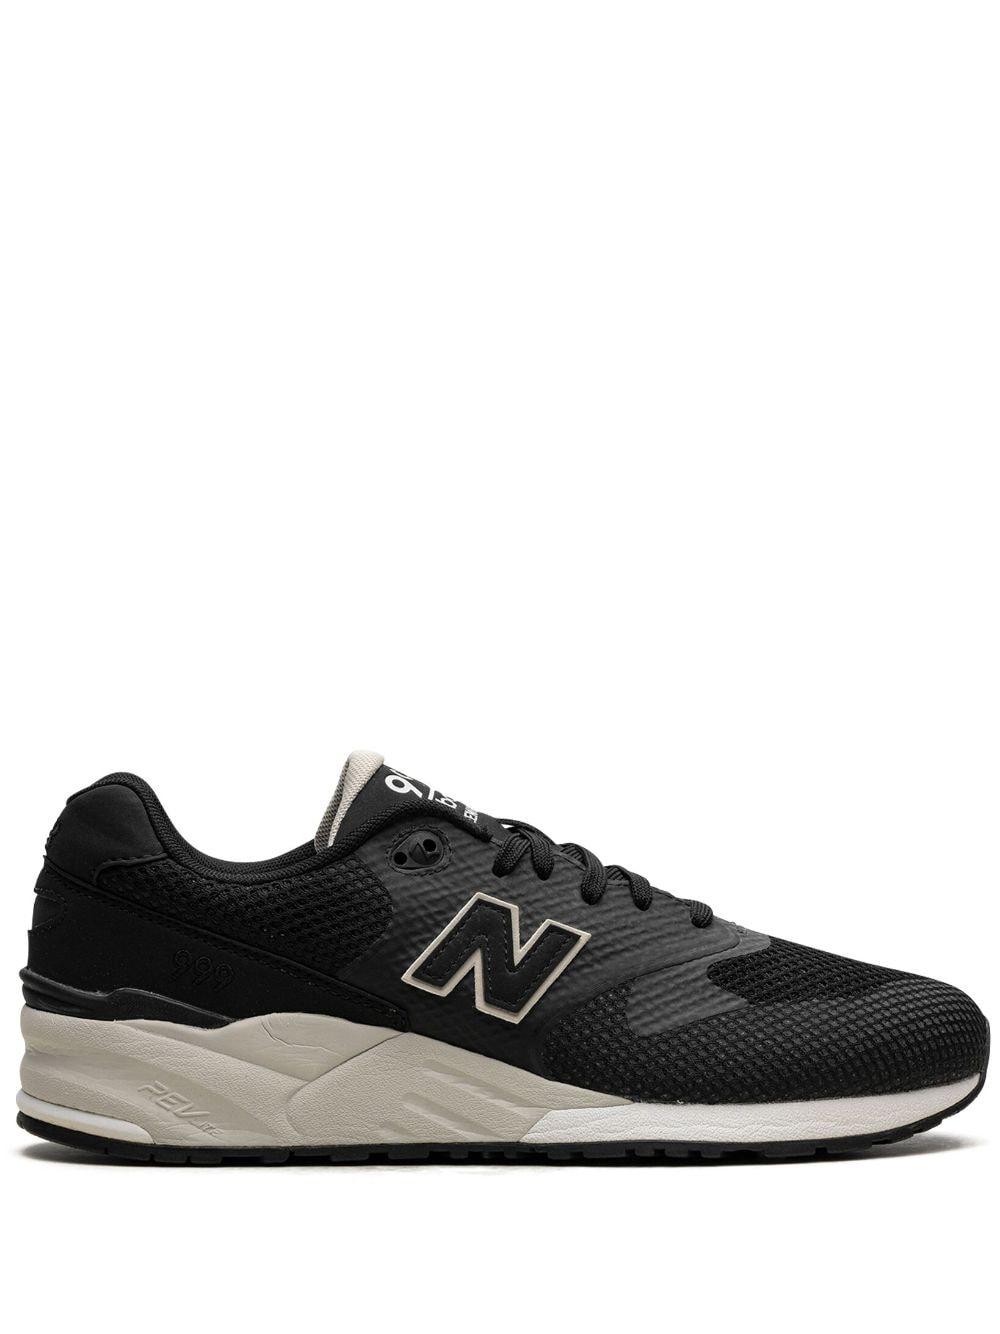 New Balance 999 Re-engineered "black/white" Sneakers for Men | Lyst